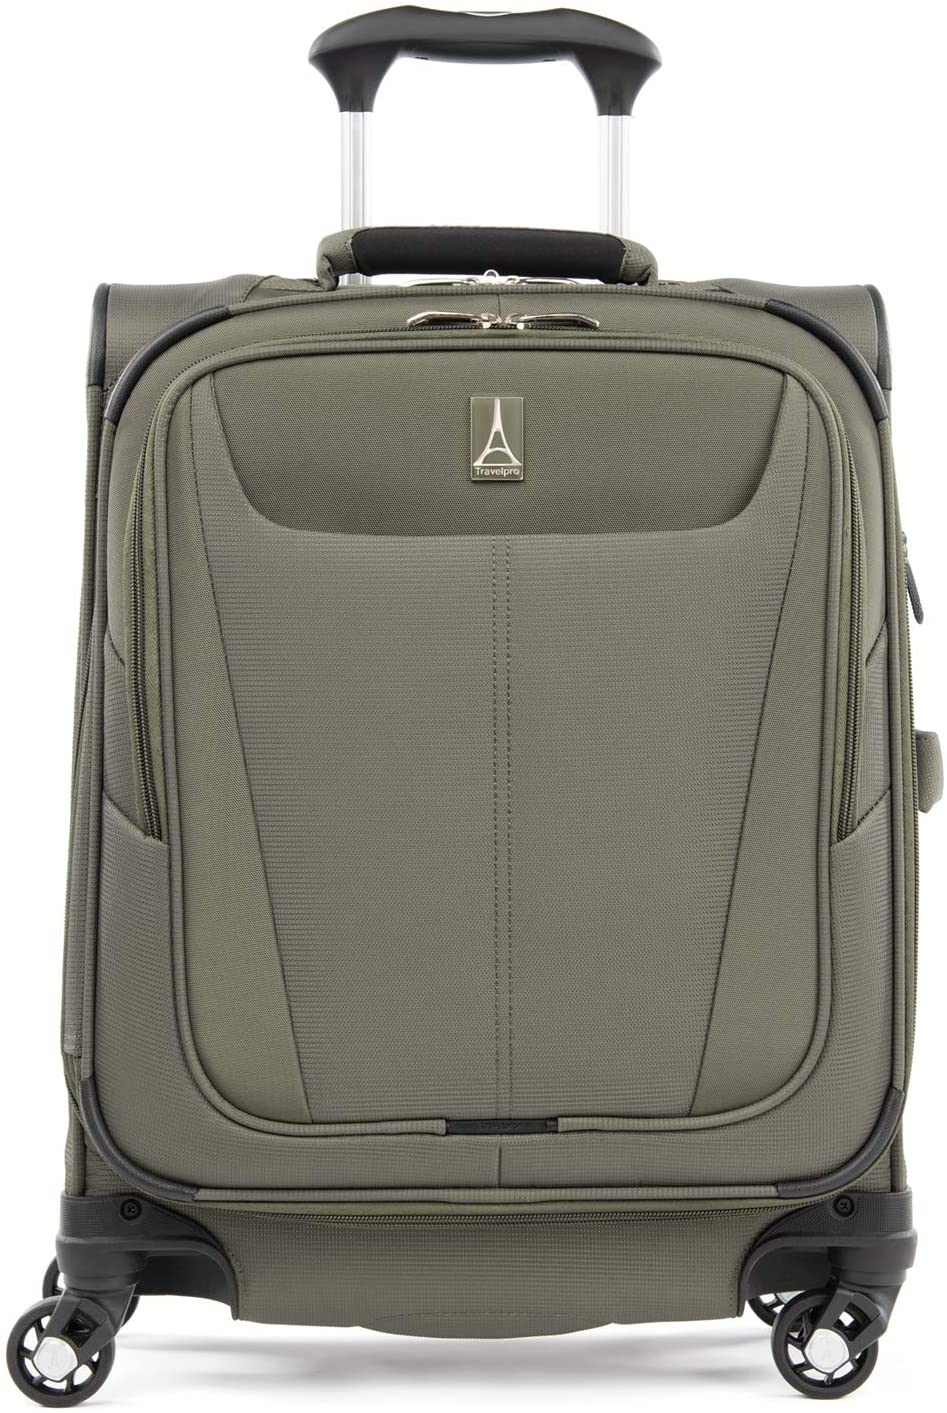 Travelpro-Maxlite-5-Softside-Expandable-Spinner-Wheel-Luggage-Slate-Green-Carry-On